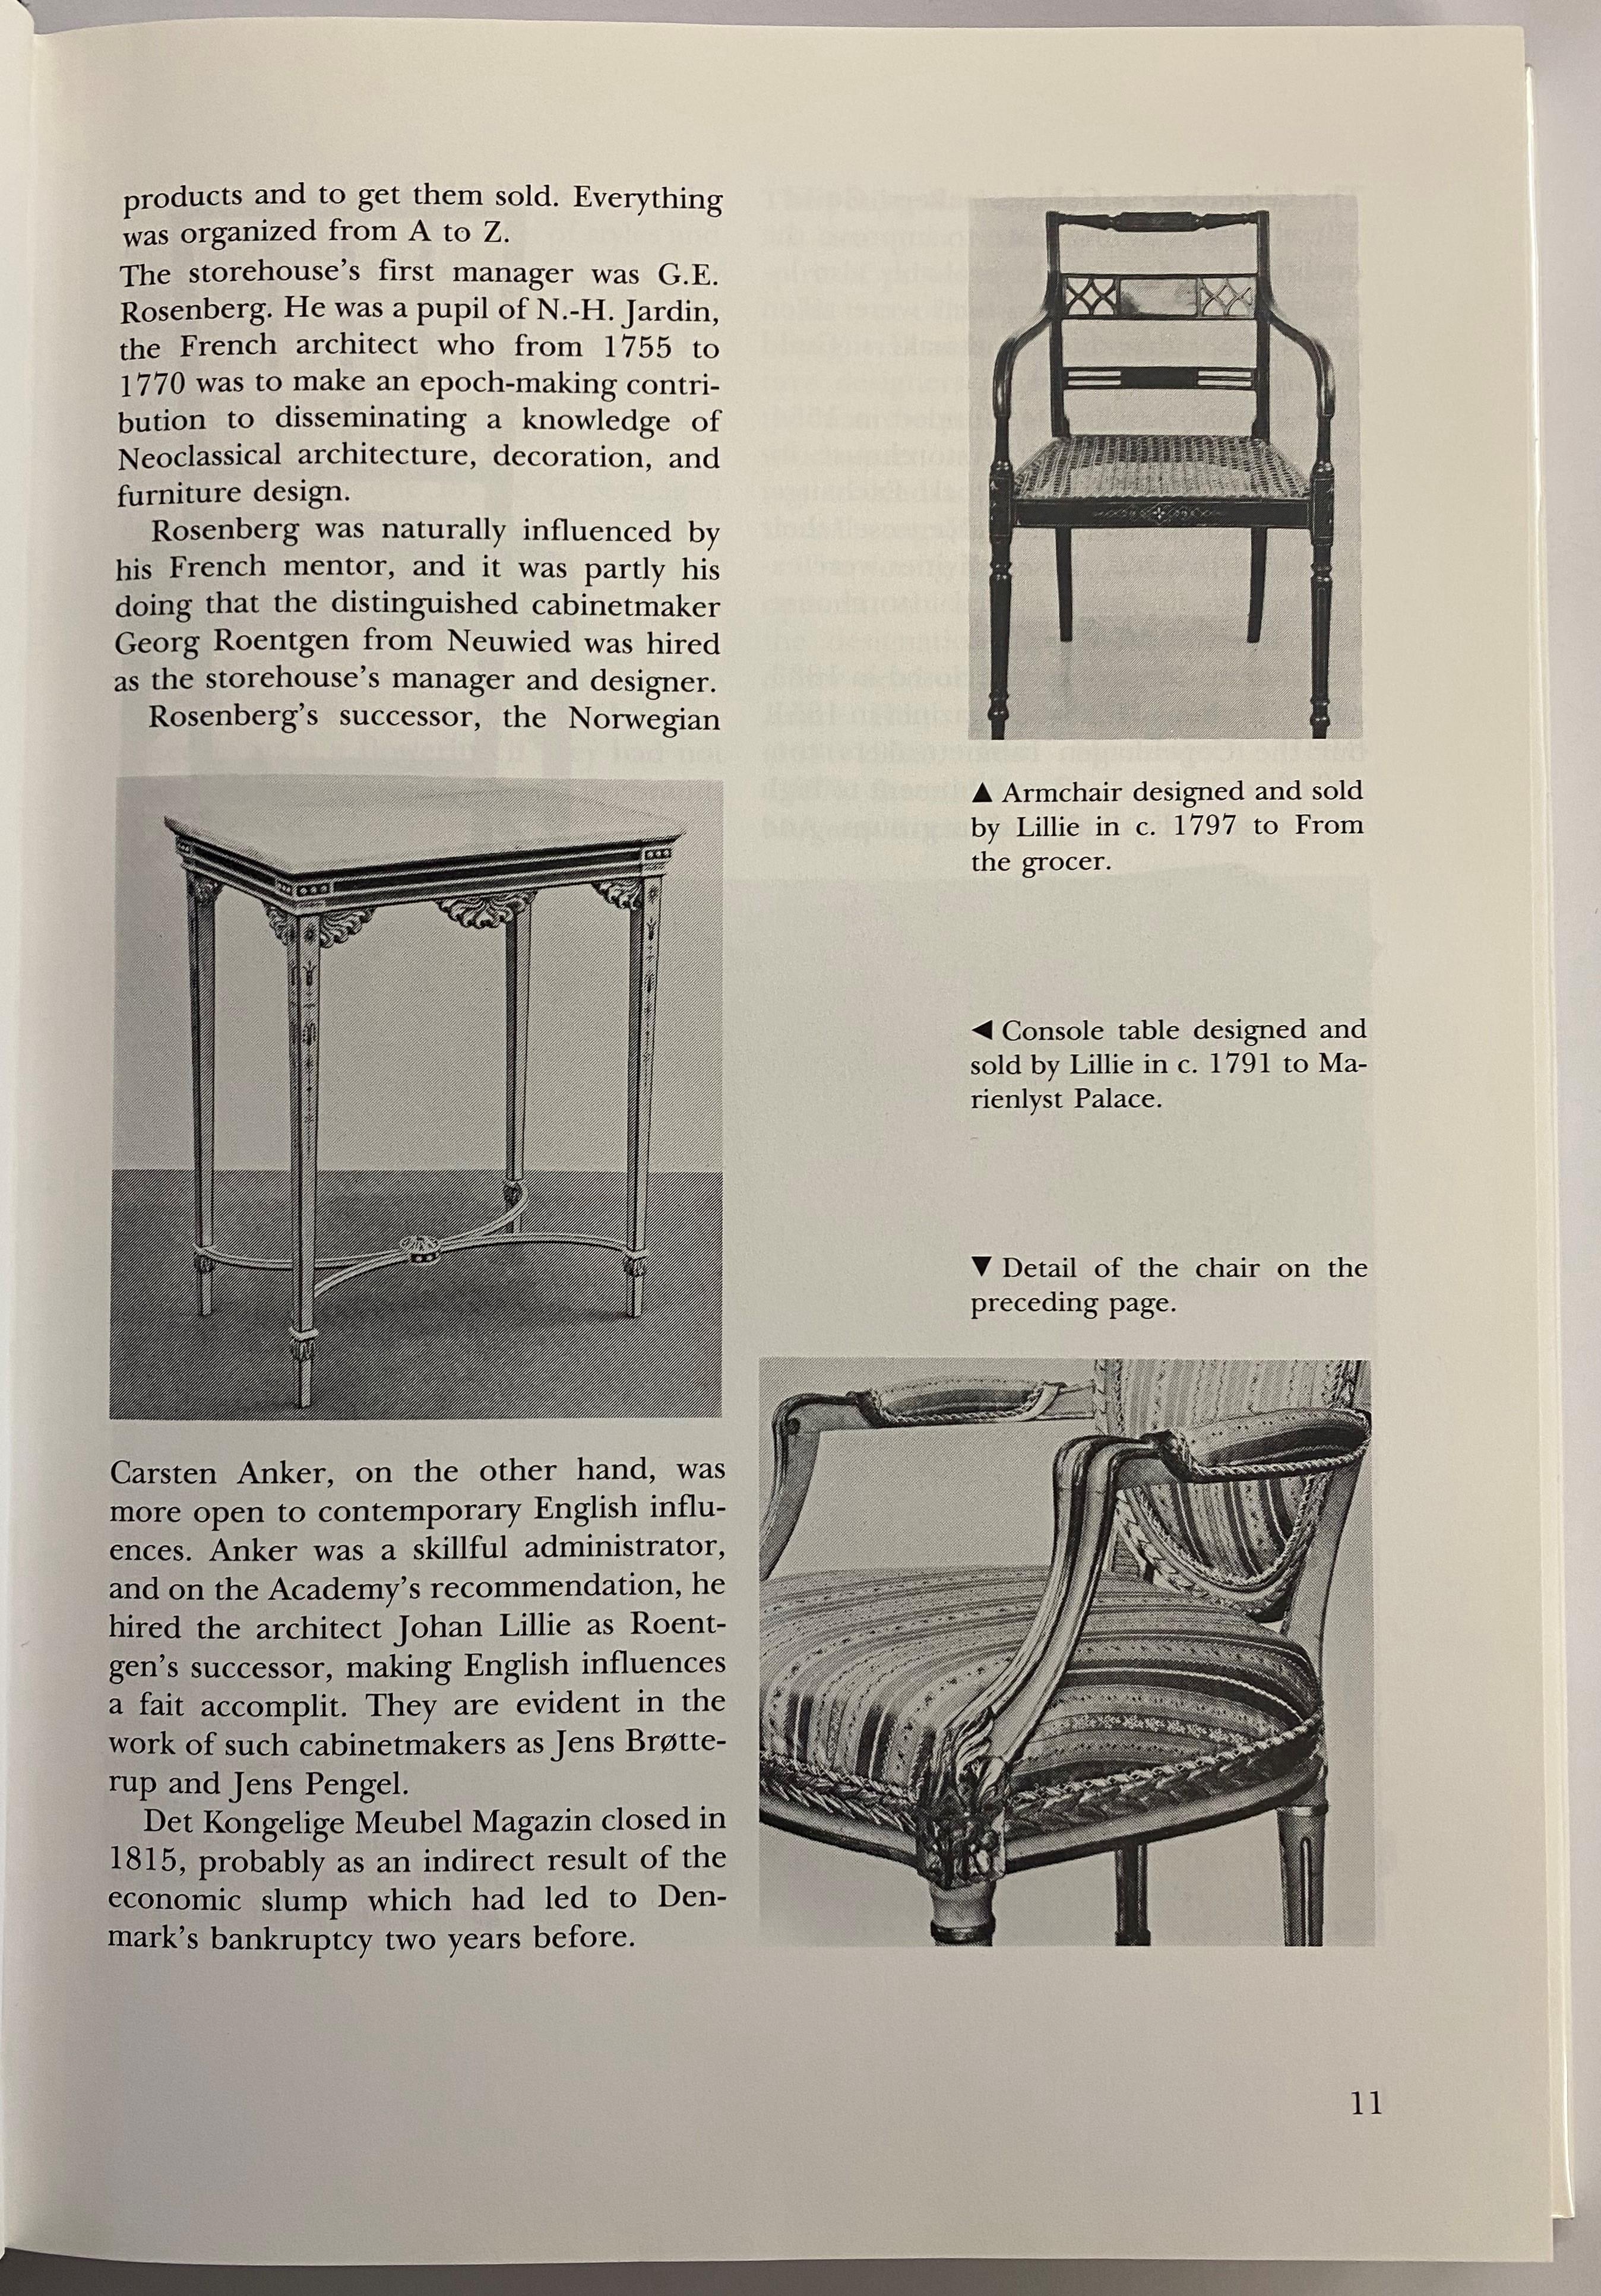 Highly important, Frederik Sieck's work on Danish furniture design is considered a classic and authoritative work. It gives a short illustrated review of developments that began with Kaare Klint's pioneering contribution. The description of the work